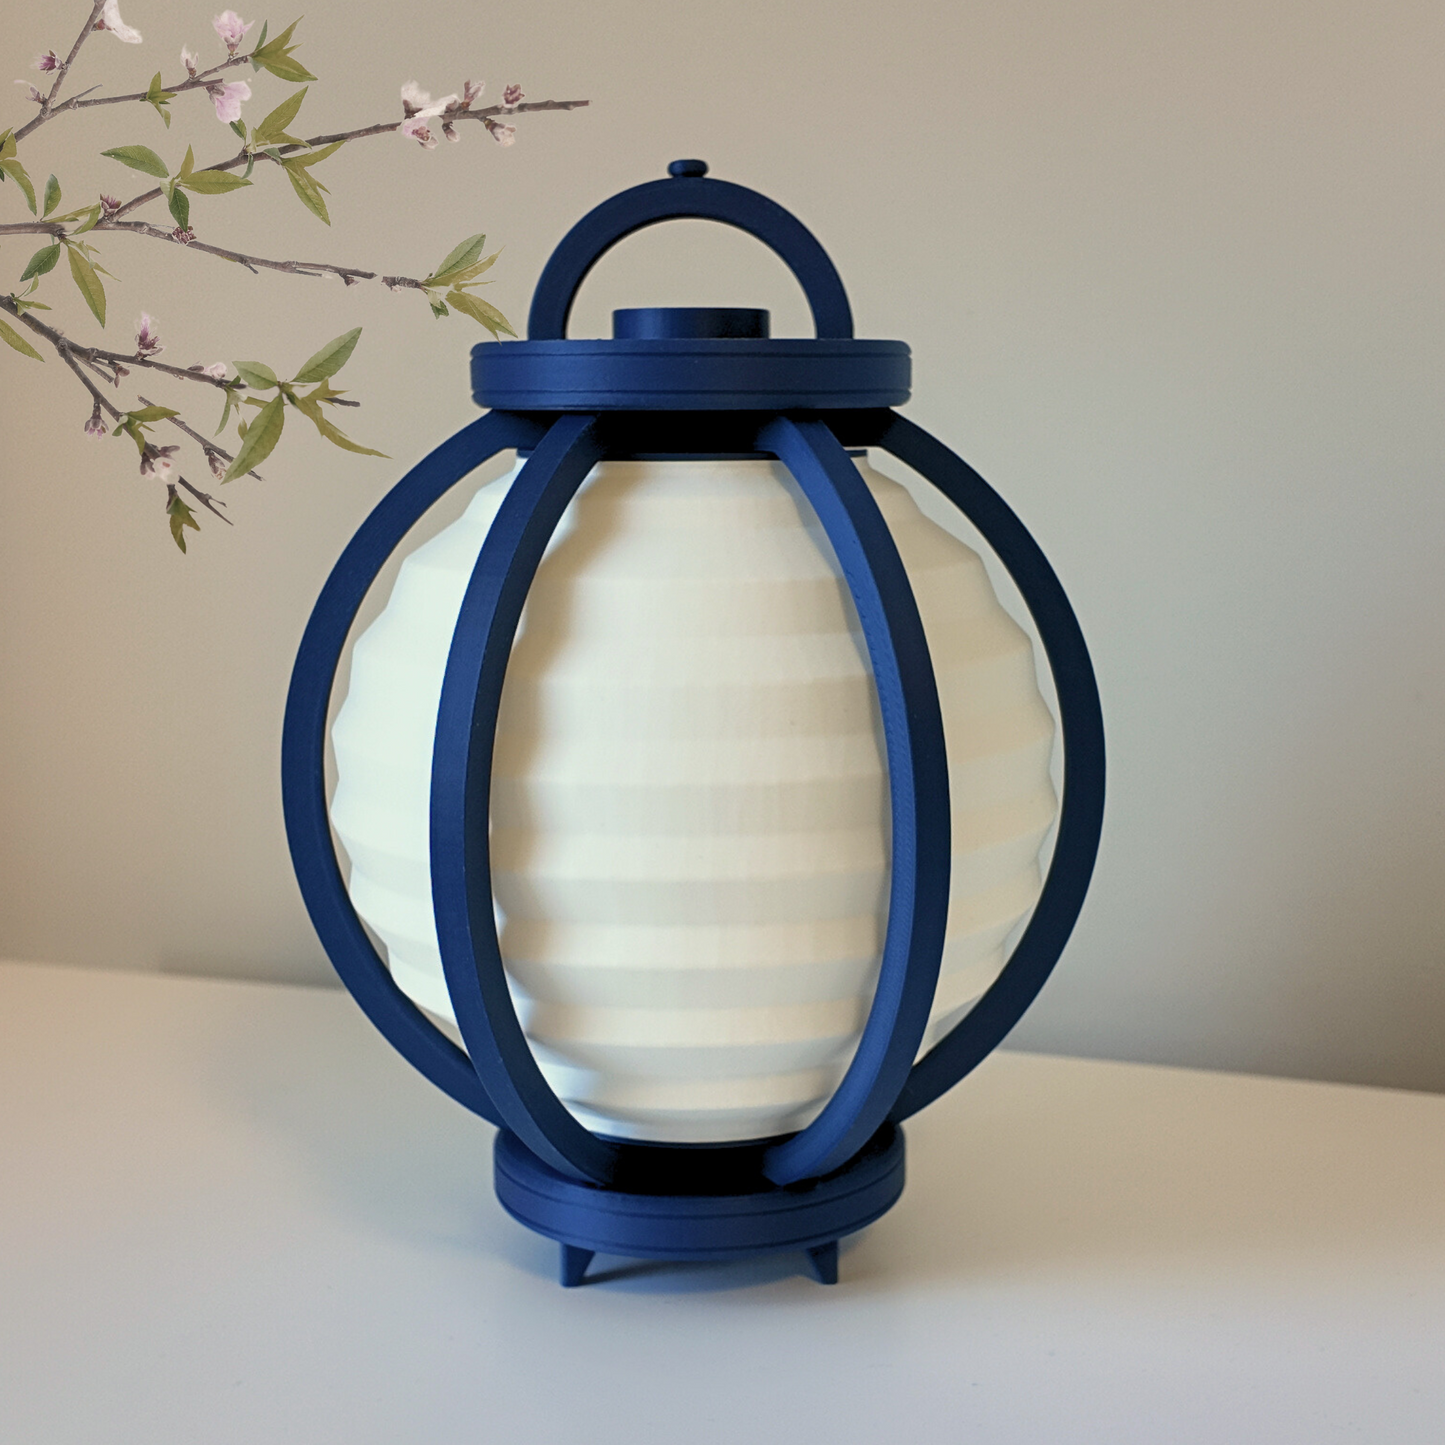 Chinese Lantern - Exquisite Chinese Decor for Home and Room | Unique Desk Lamp and Table Lamp Design | Transforms Any Space | Japanese Decor